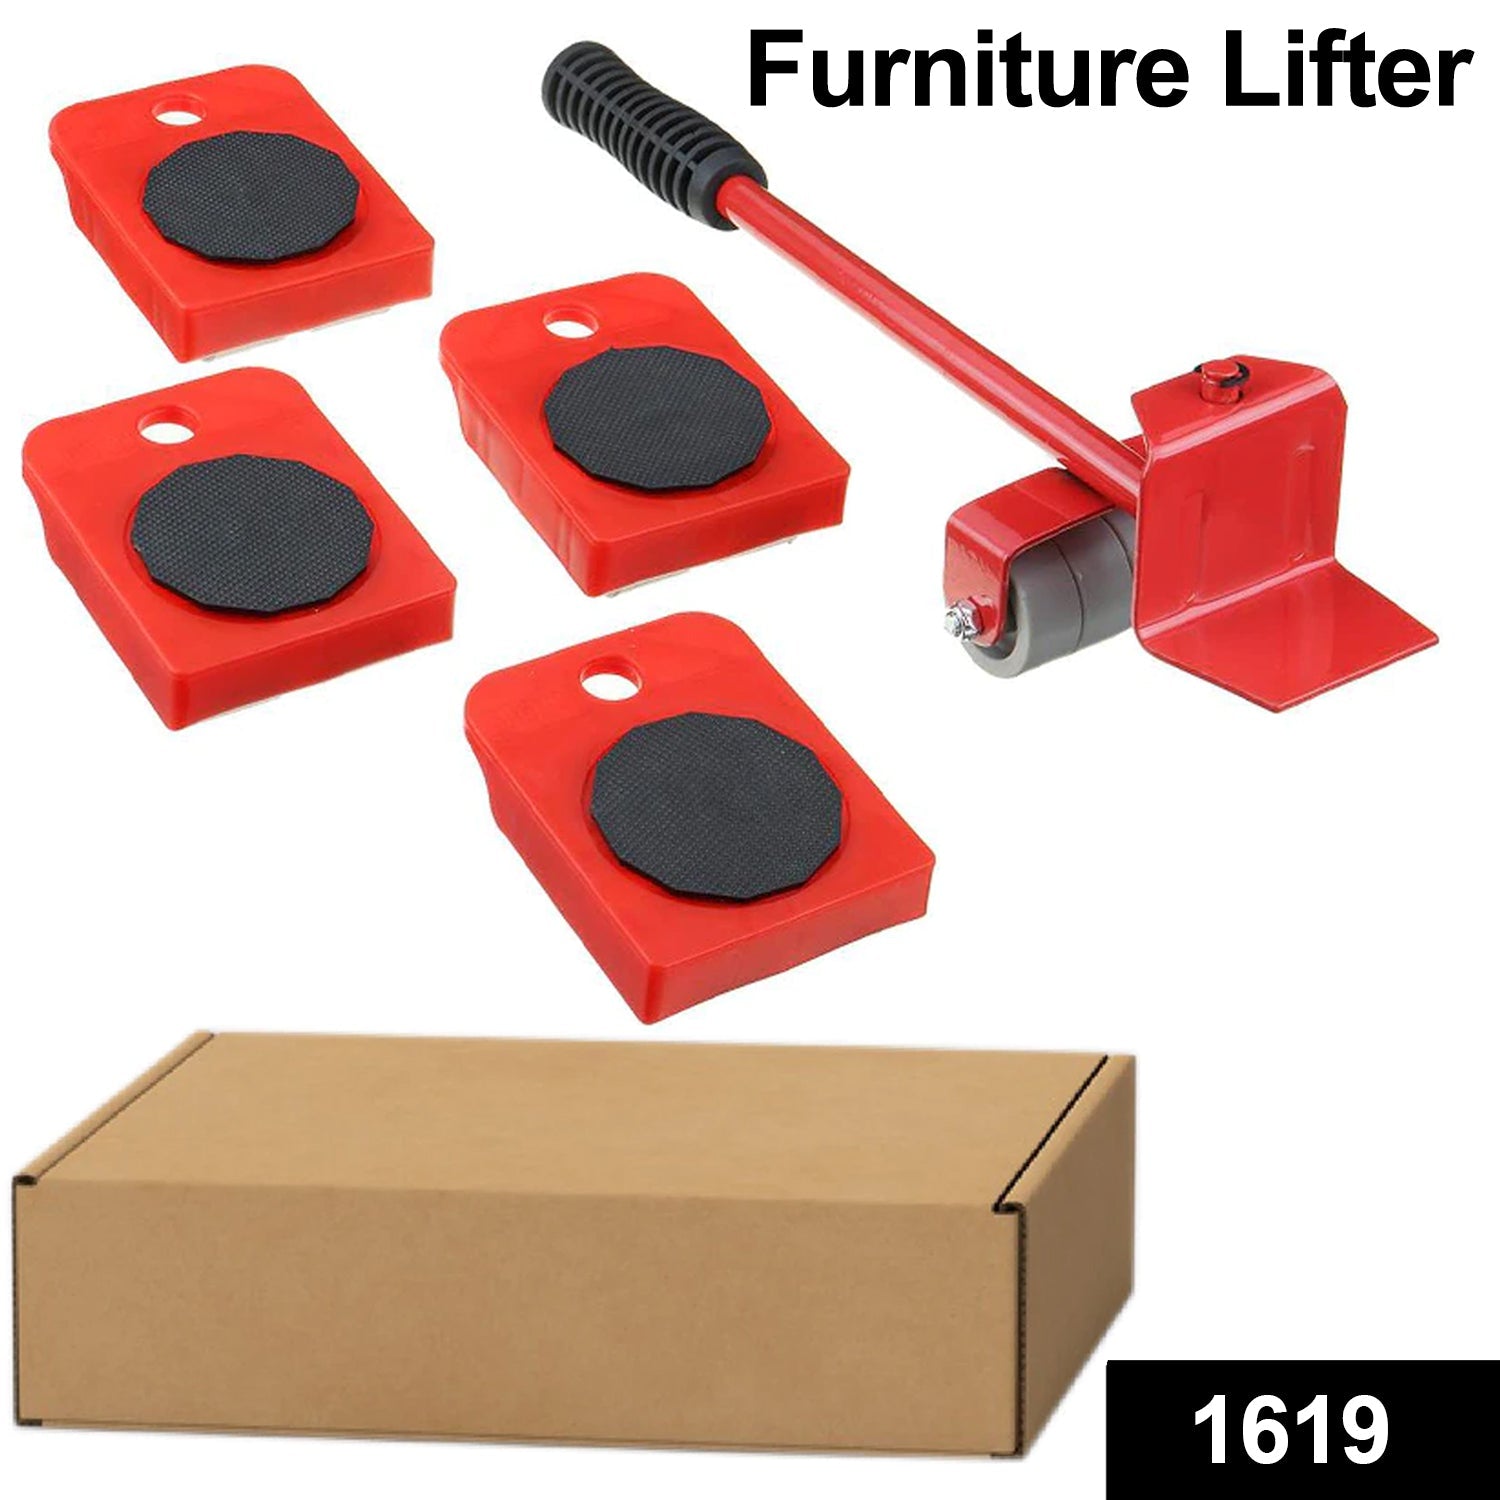 Furniture Lifter Mover Tool Set Heavy Duty Furniture Shifting